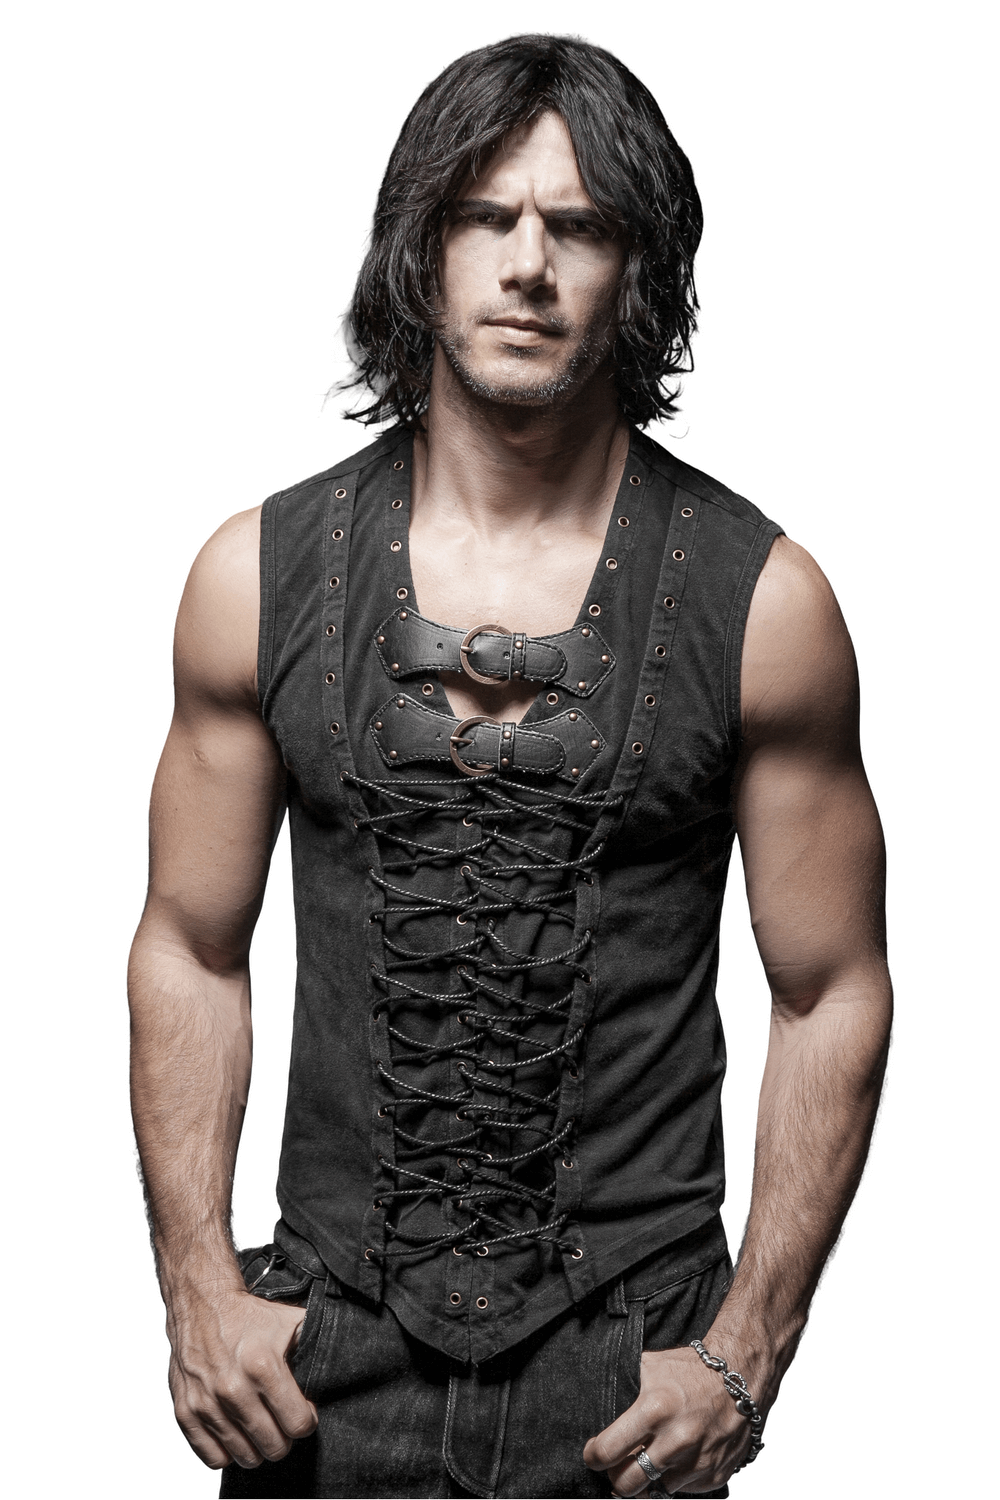 Men's Gothic Vest with Front Strap Detail And Buckles